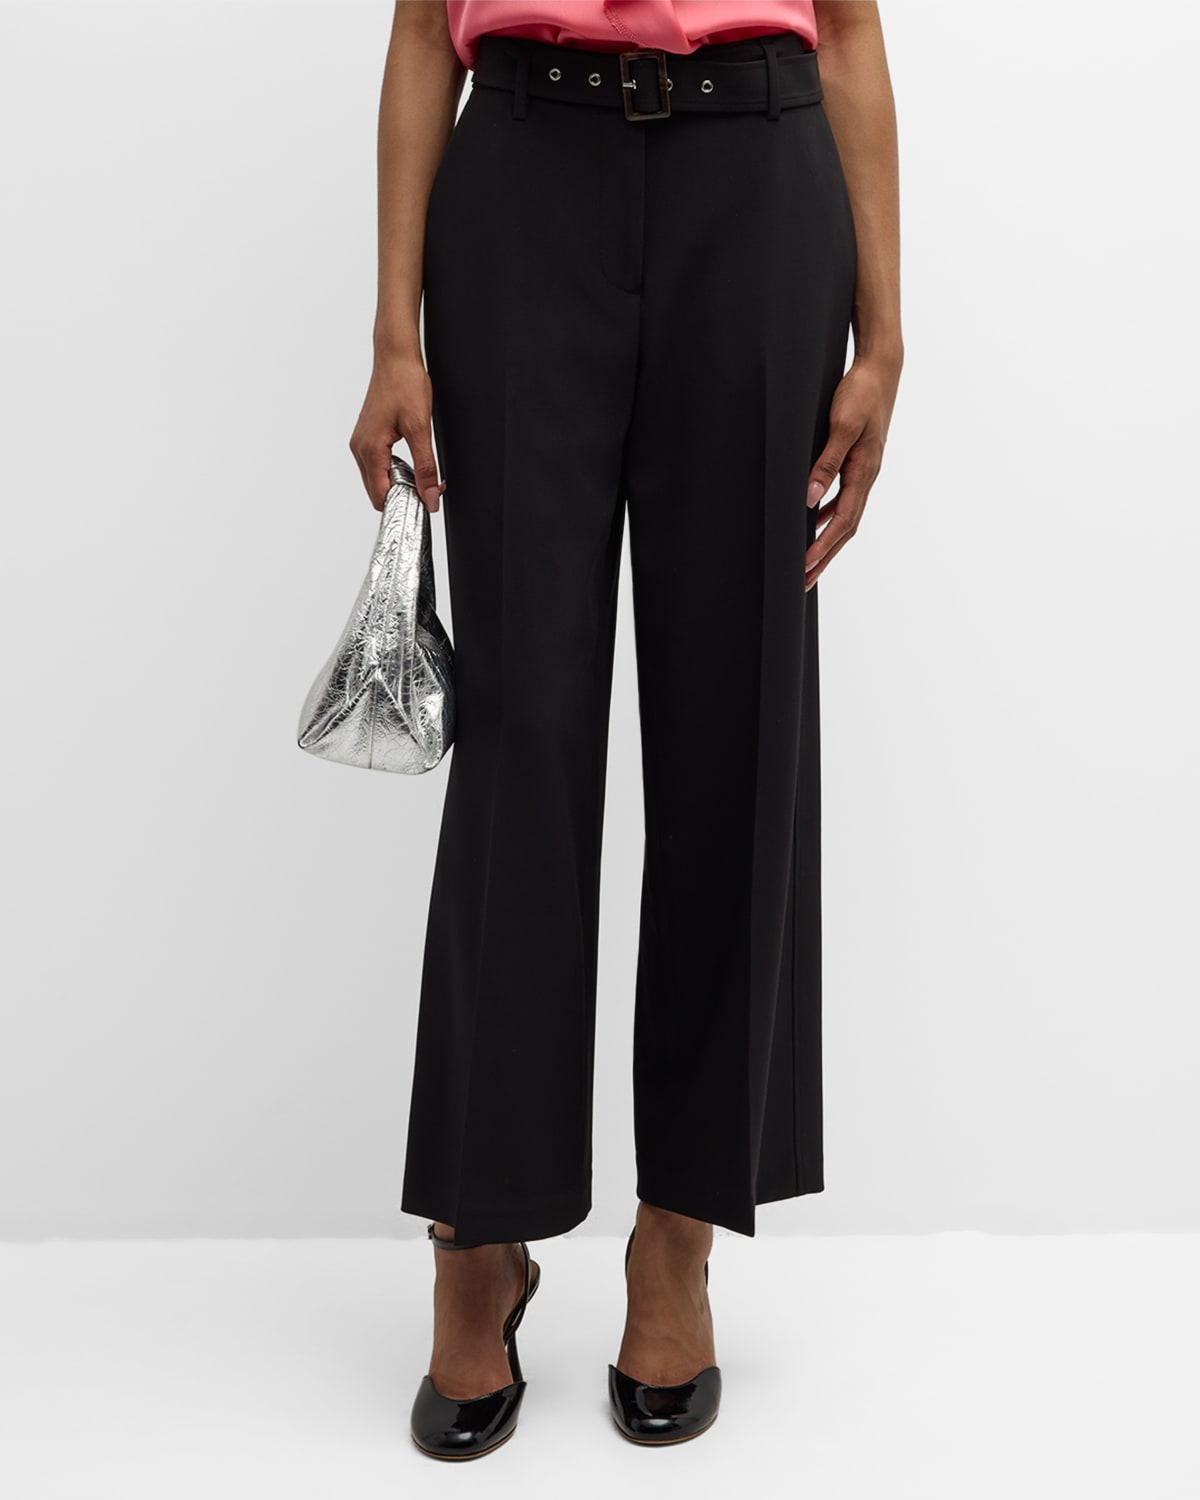 The Carla Belted Culotte Pants